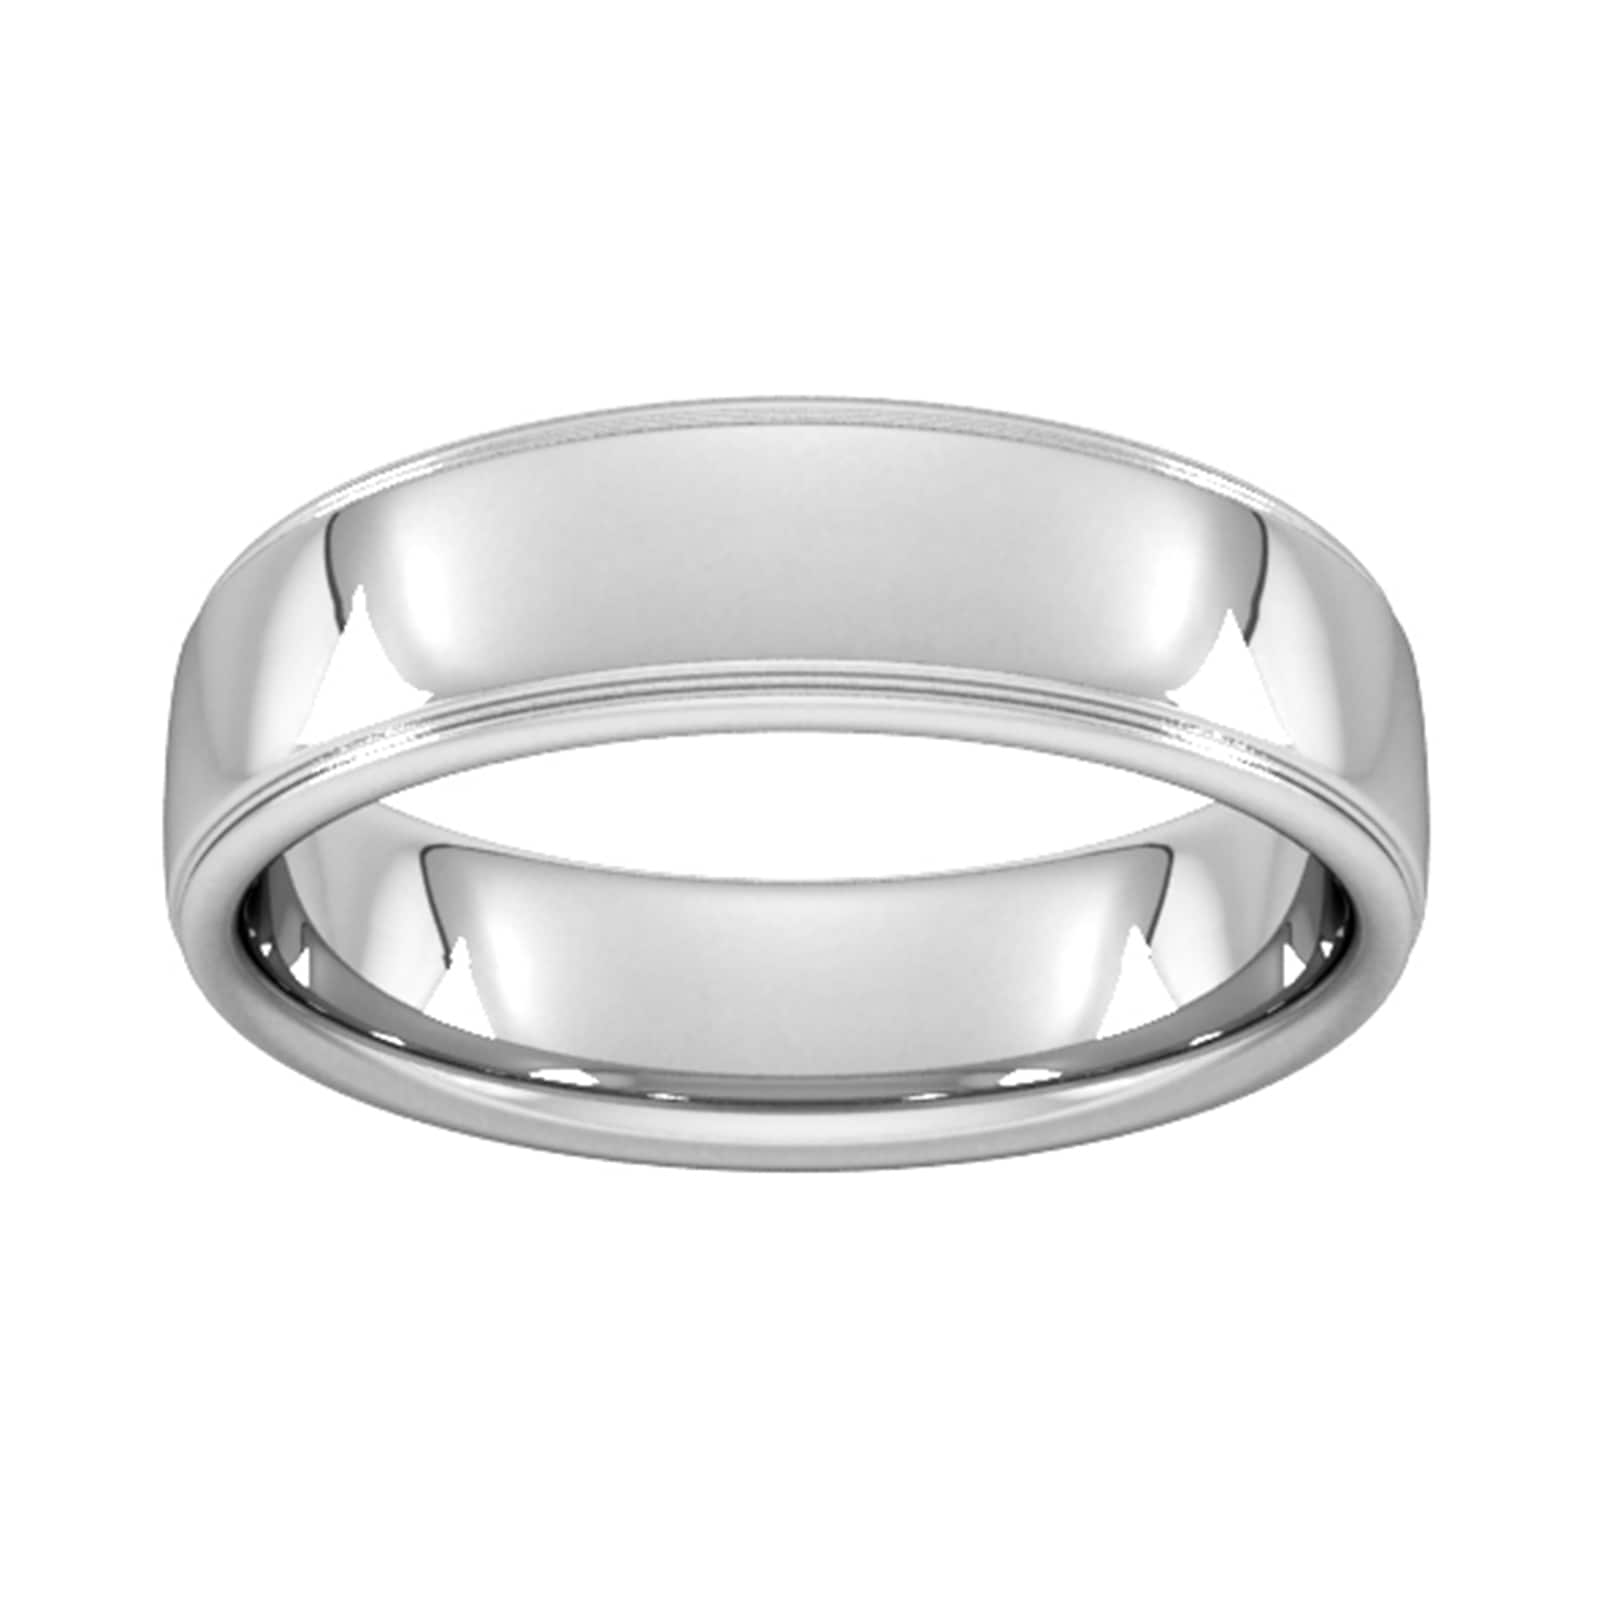 6mm D Shape Heavy Polished Finish With Grooves Wedding Ring In 9 Carat White Gold - Ring Size L